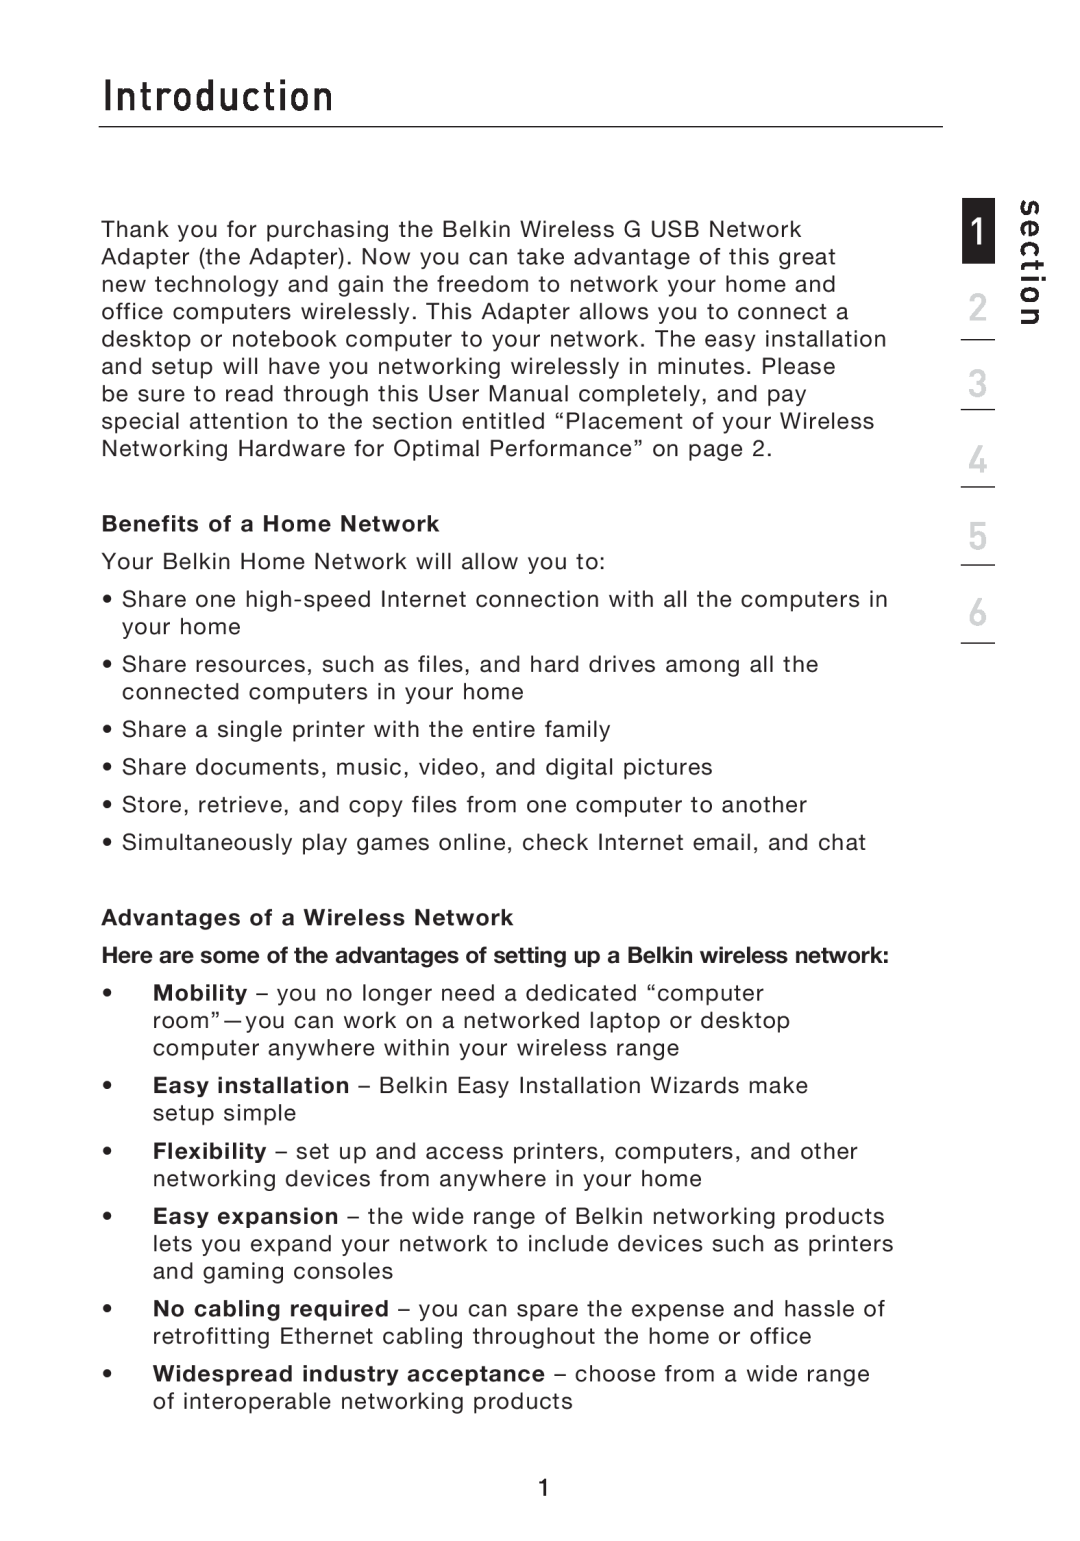 Belkin P74471EA-B manual Introduction, section, Benefits of a Home Network, Advantages of a Wireless Network 